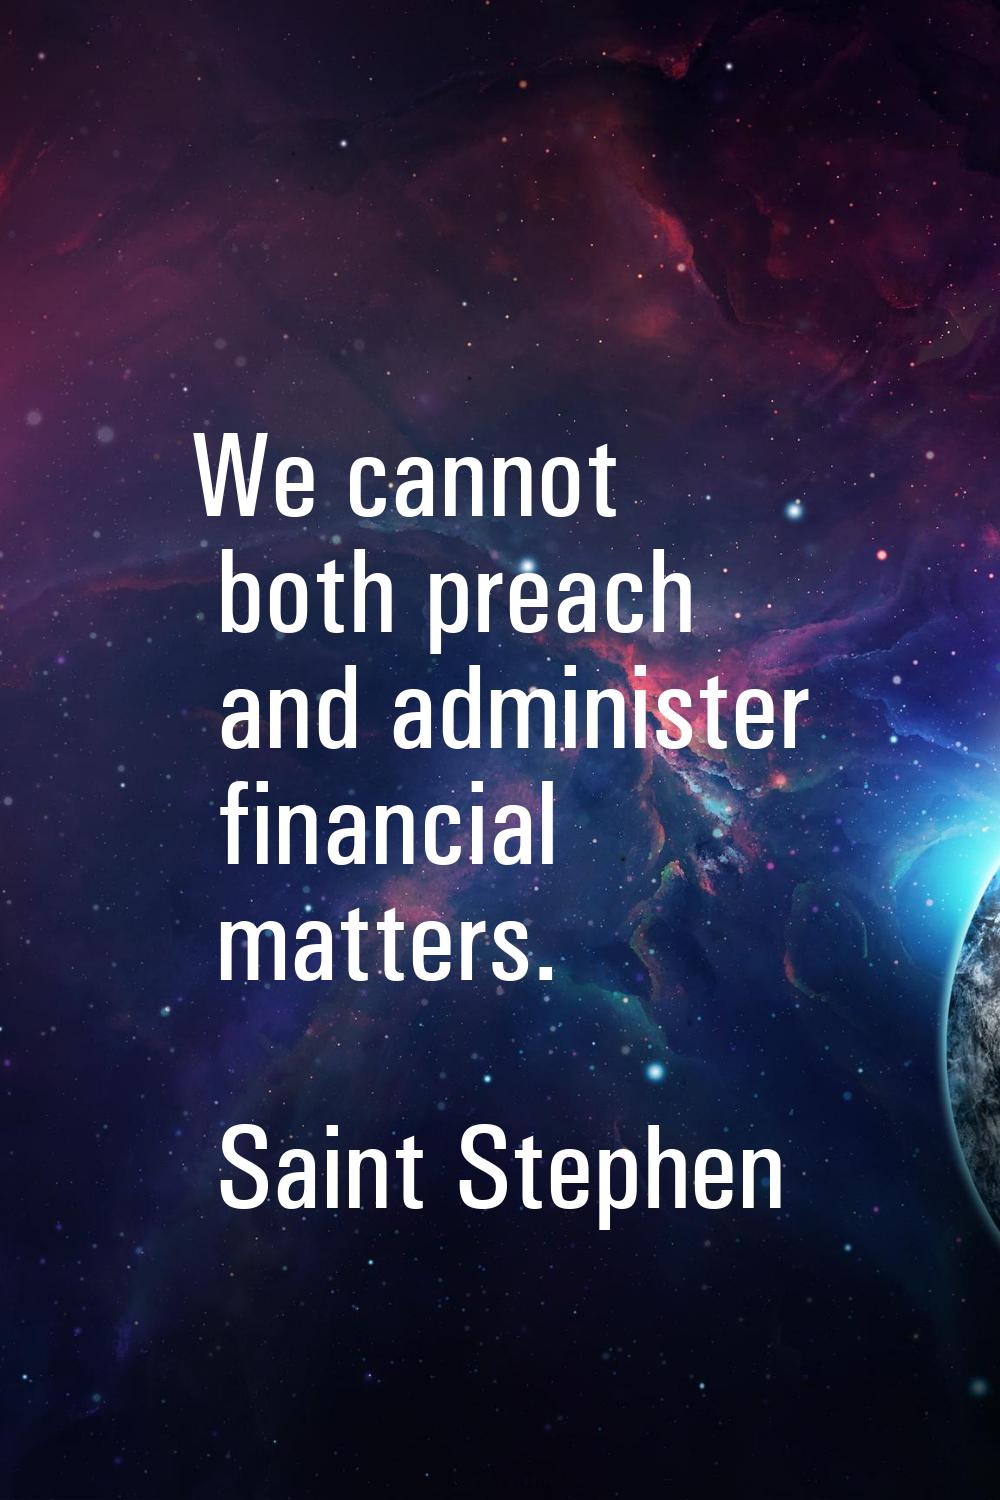 We cannot both preach and administer financial matters.